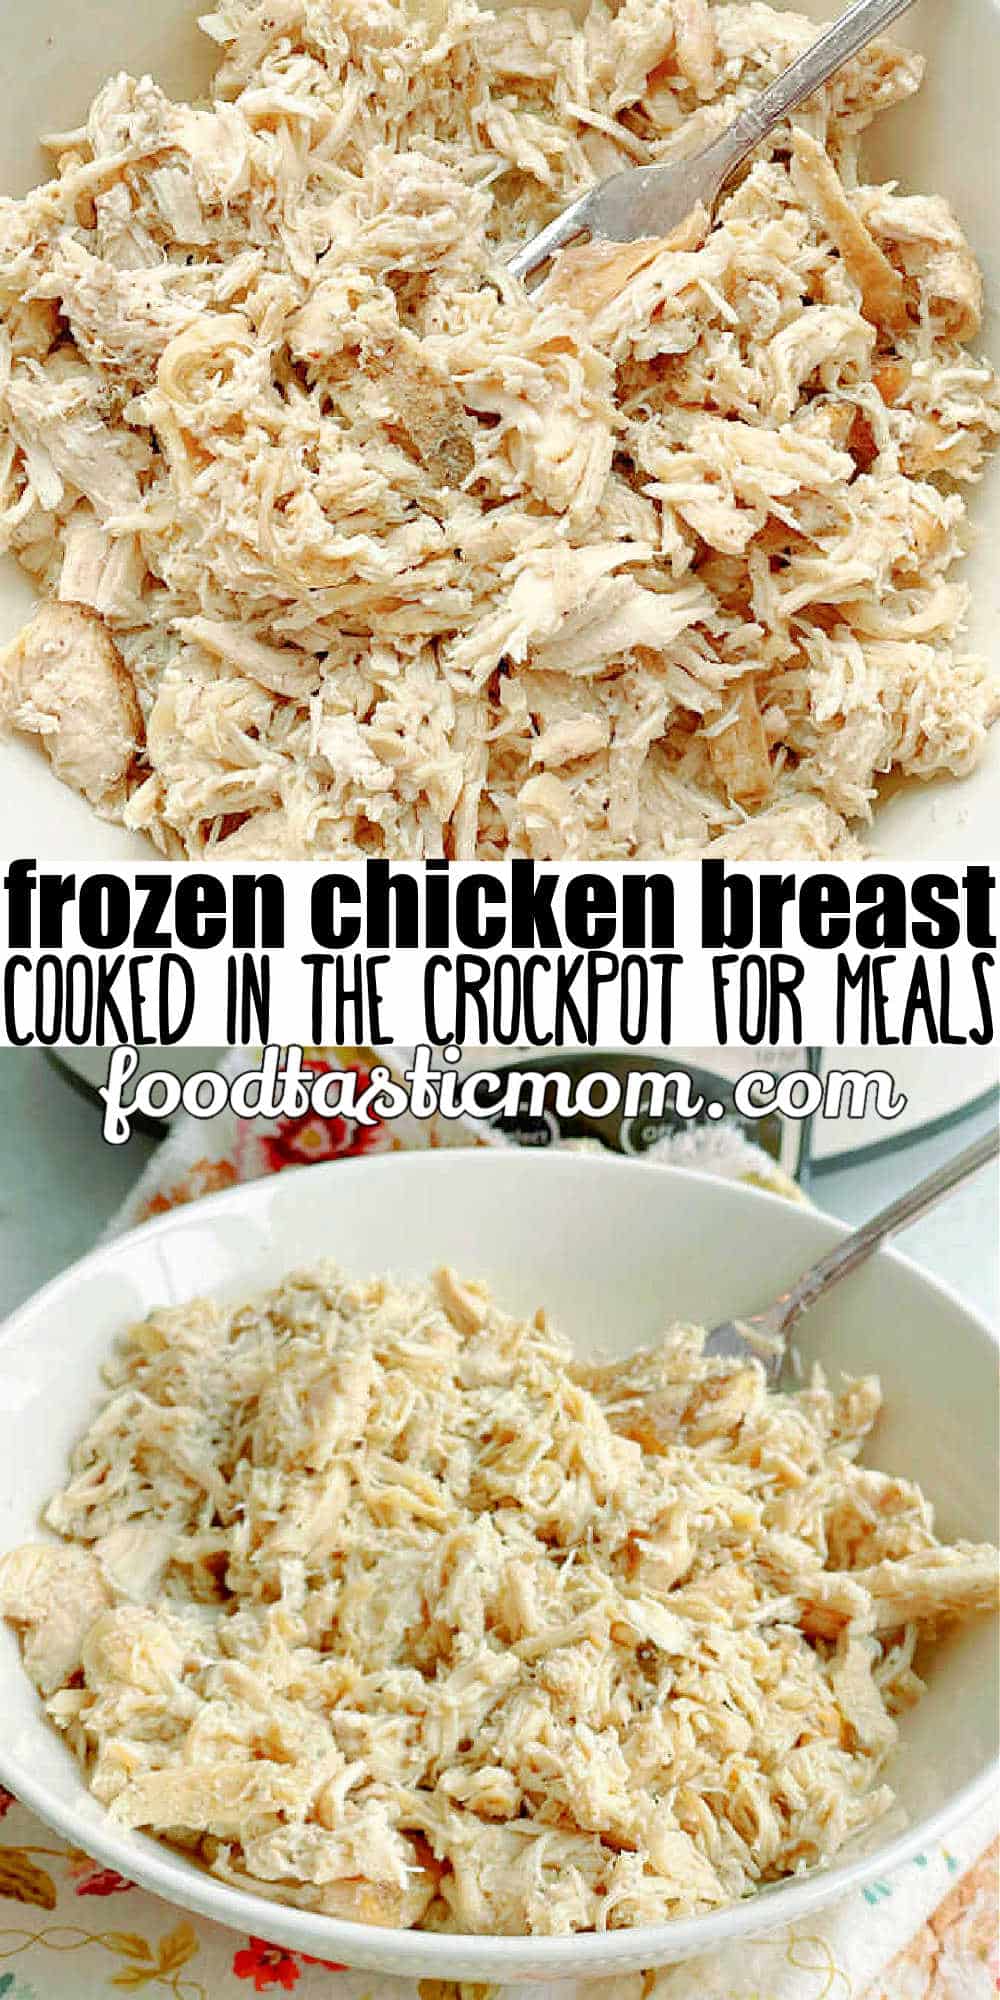 Learn how to make frozen, boneless and skinless chicken breasts in the Crock Pot for using in any recipe calling for cooked chicken. via @foodtasticmom